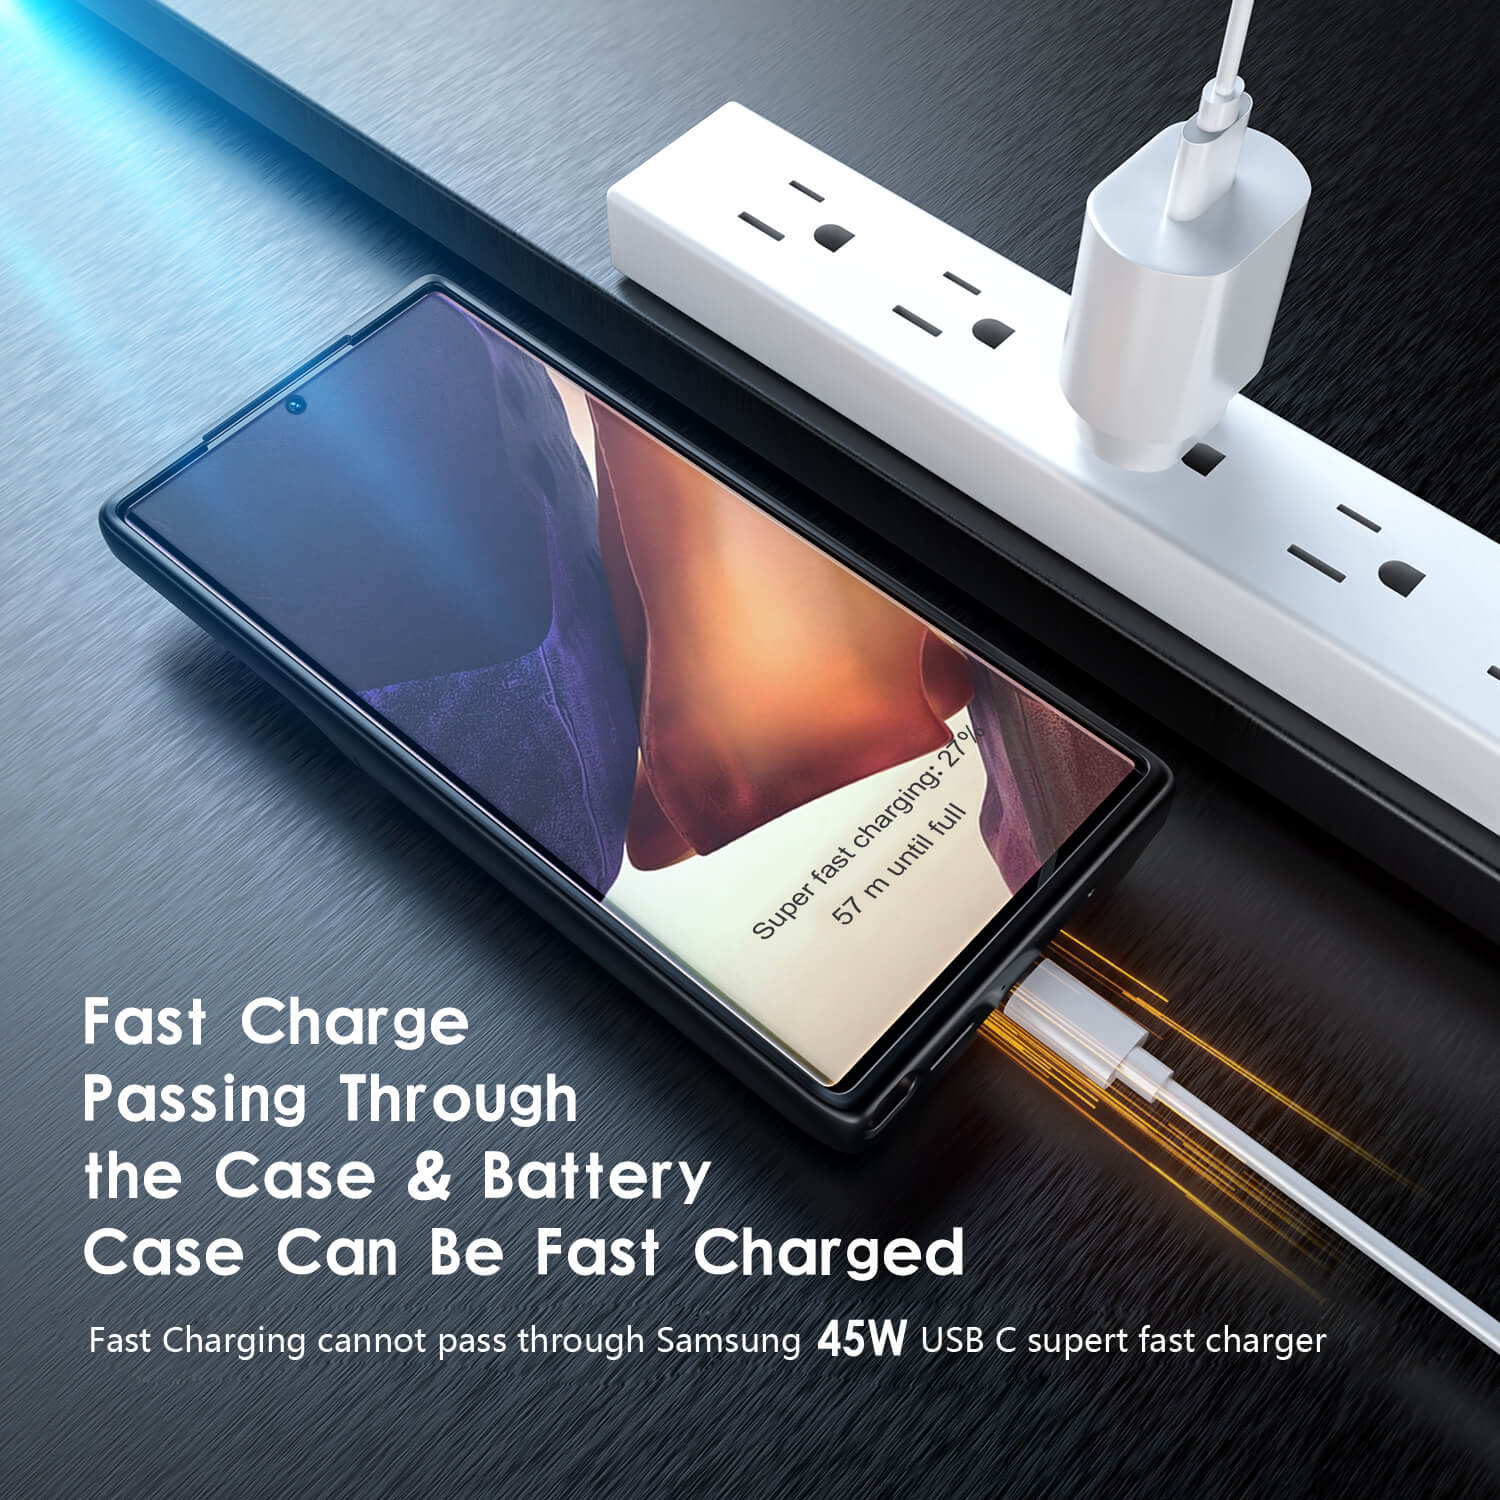 galaxy note 20 ultra battery case, 5000mAh, fast charging, qi wireless charging, wired usb c headset, otg, android auto, samsung dex, data sync